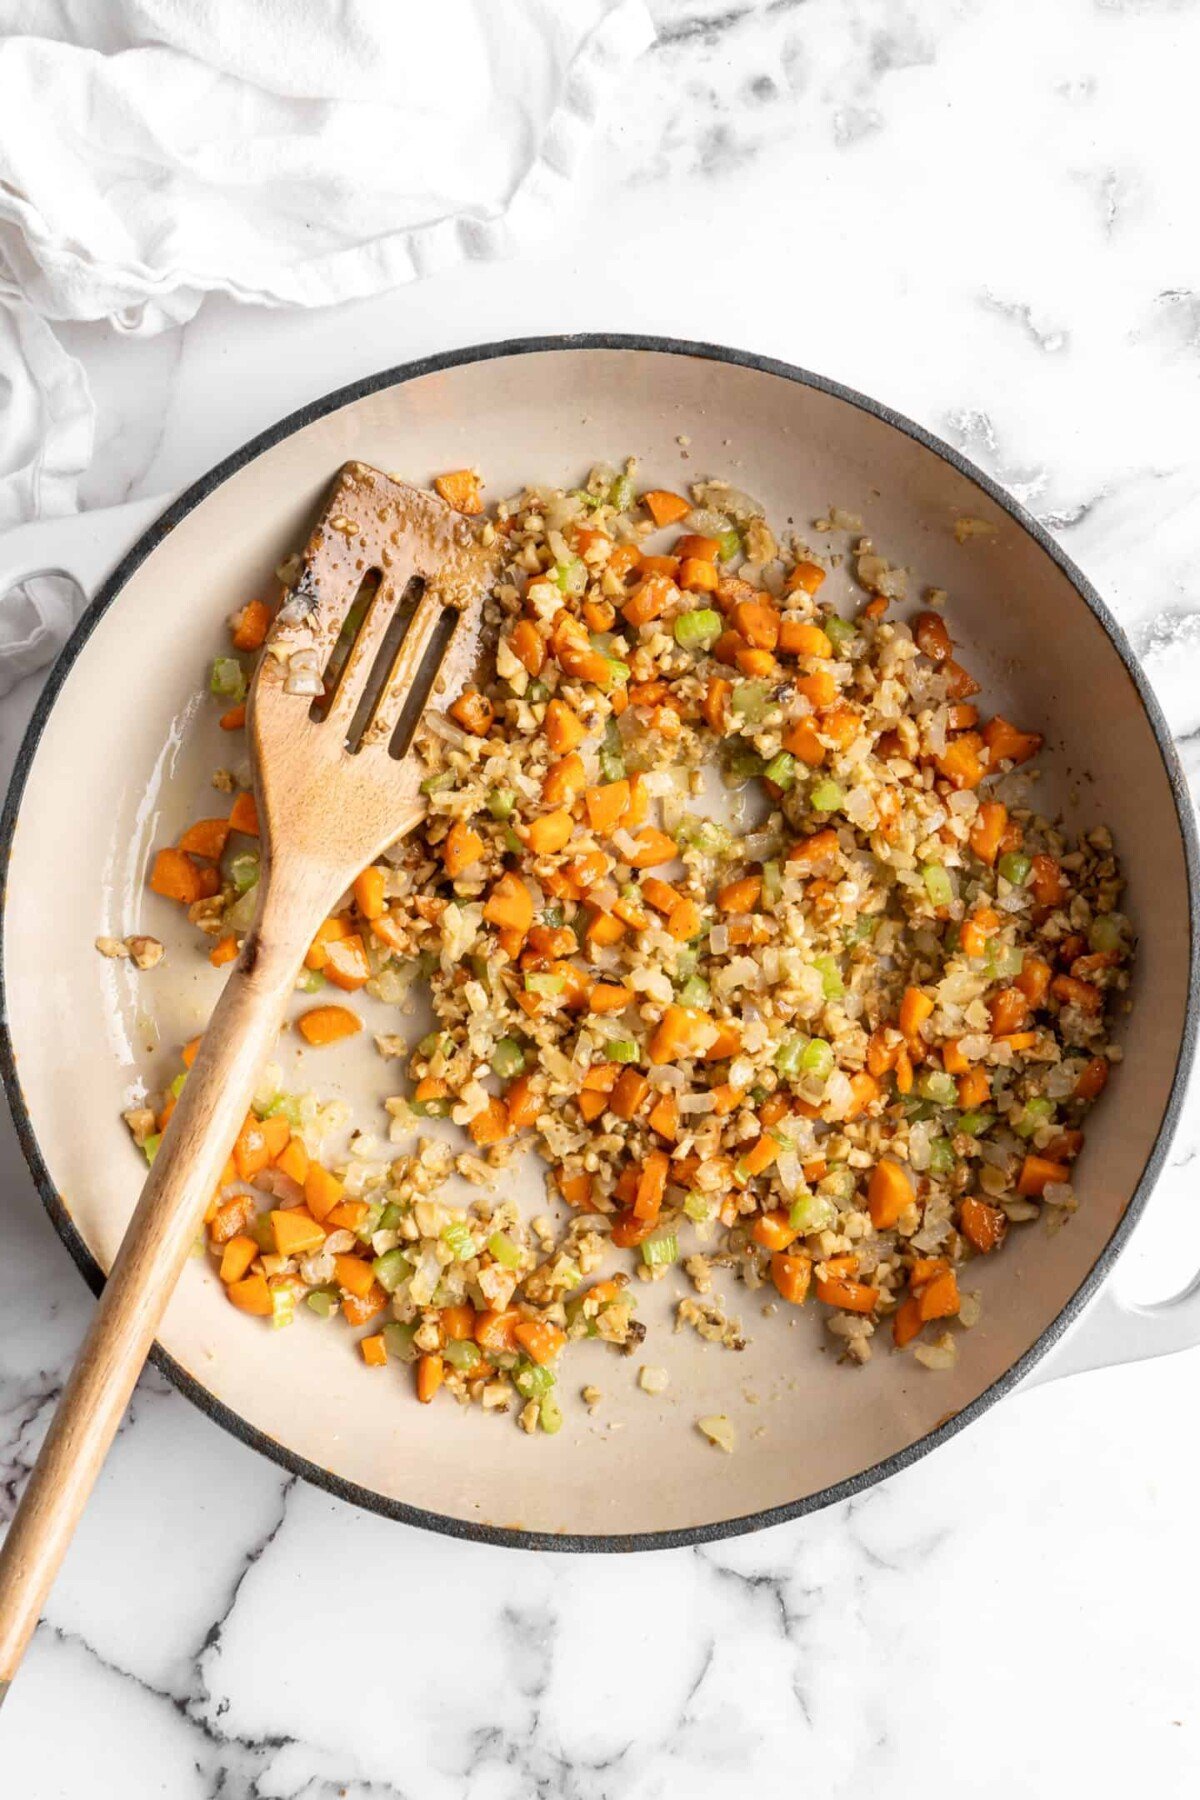 A pan with onions, carrots, celery, walnuts, and a wooden spoon in it